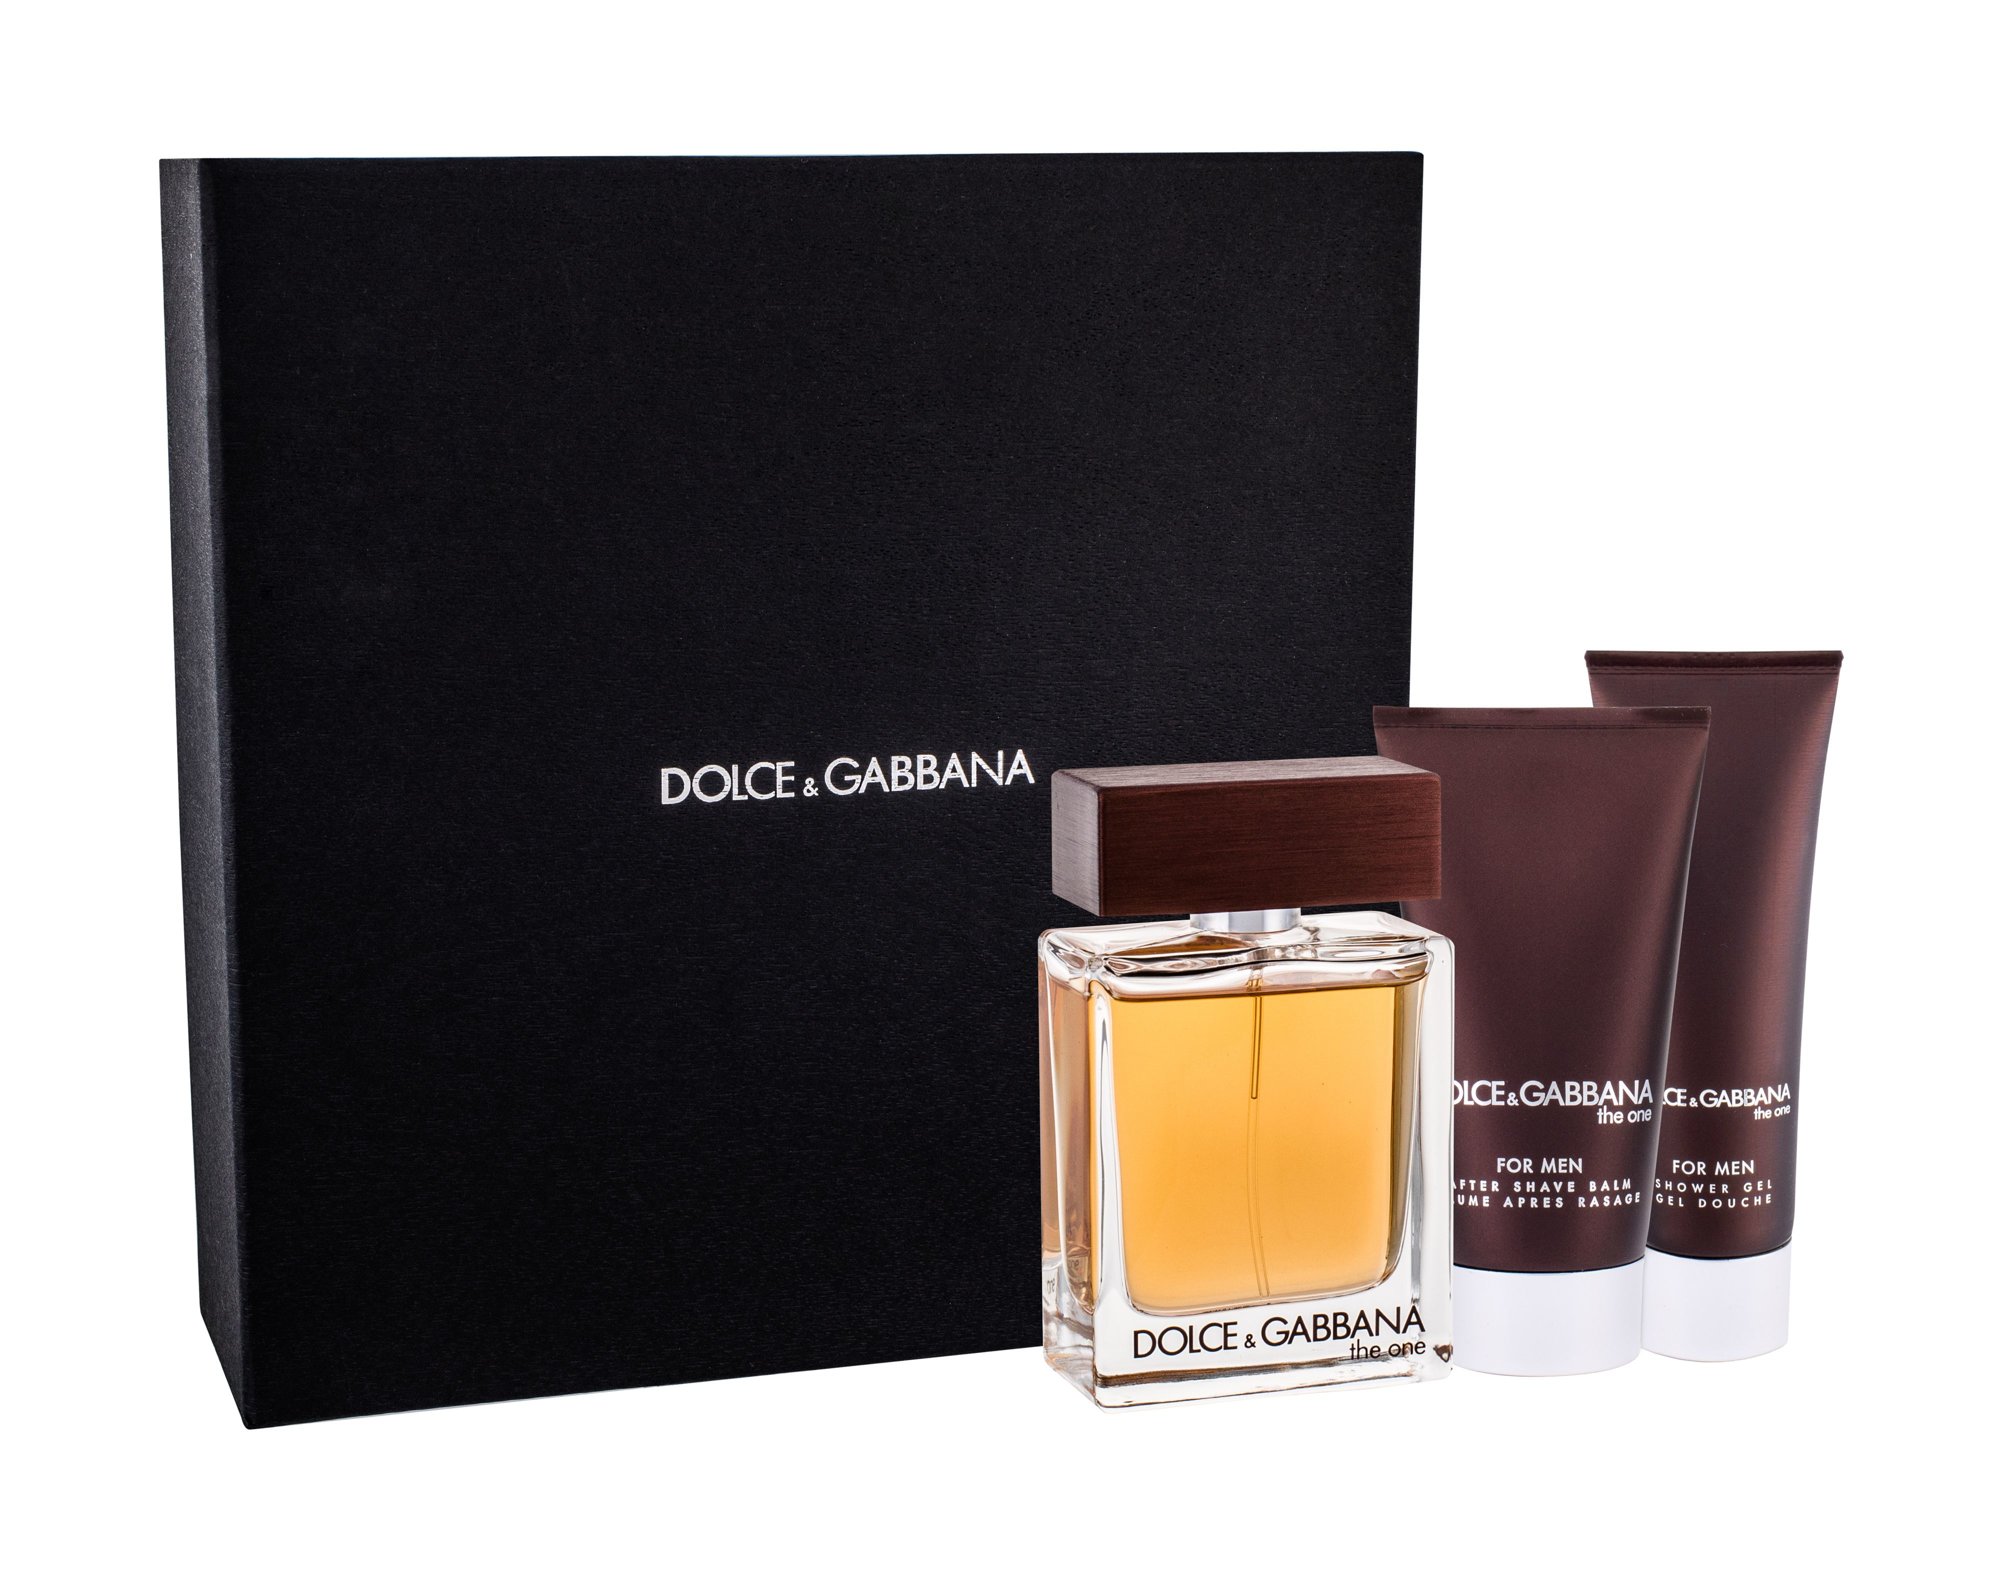 Dolce & Gabbana The One 50ml Edt 50ml + 50ml Shower gel + 50ml After shave balm Kvepalai Vyrams EDT Rinkinys